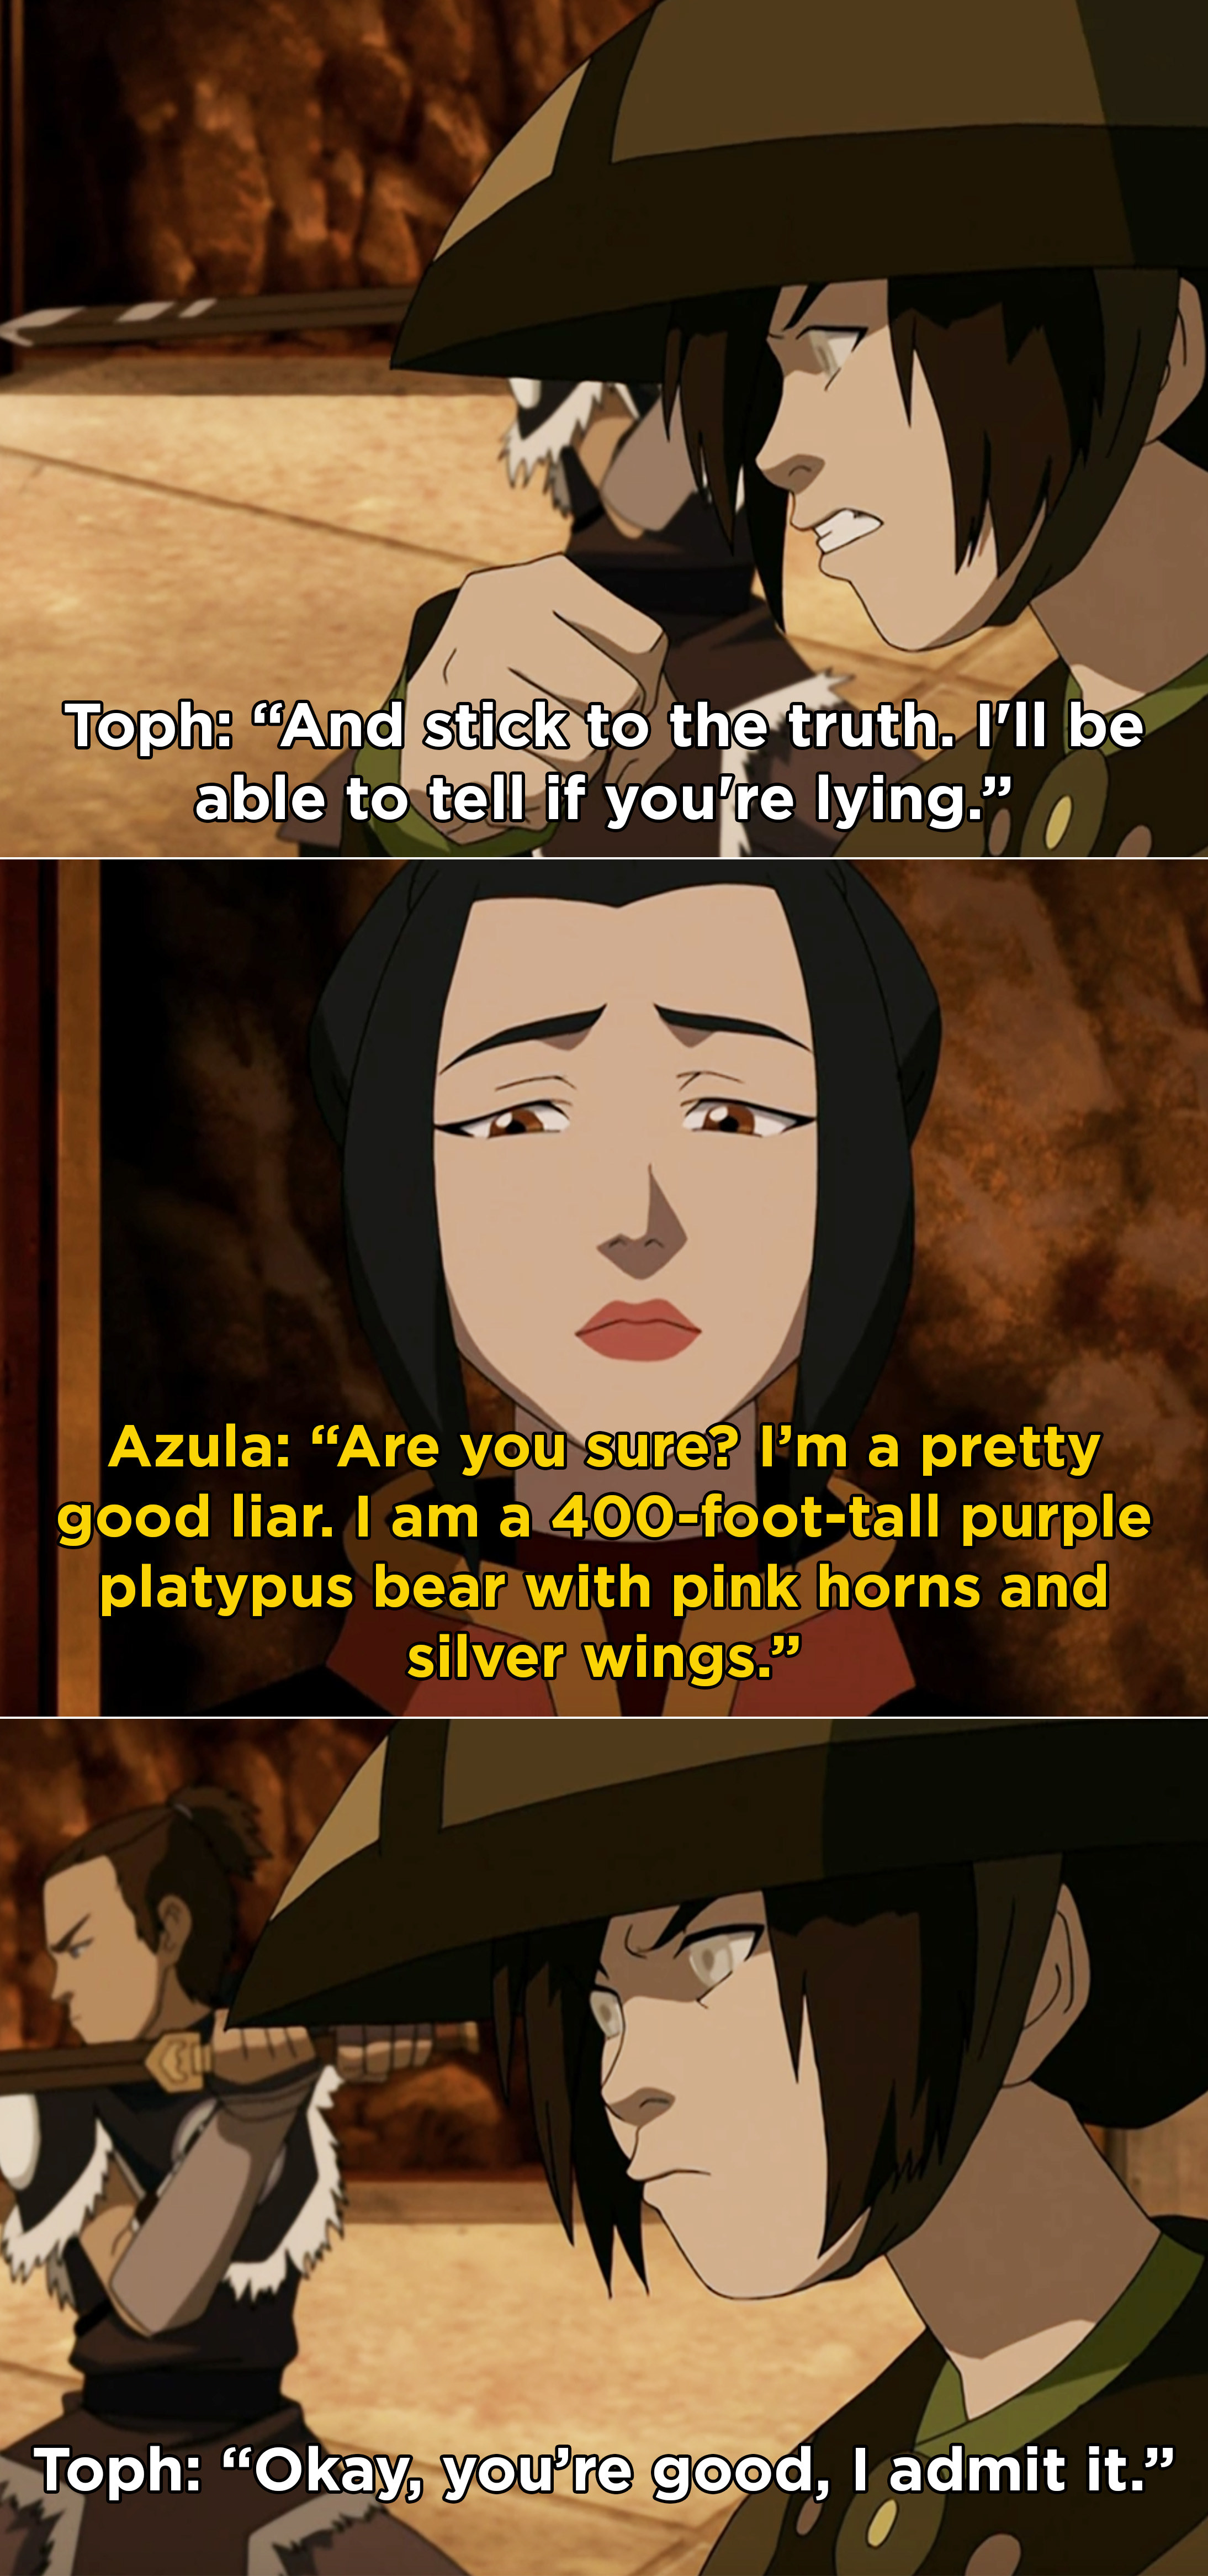 Azula lying to Toph and saying she&#x27;s a 400-foot-tall purple platypus bear